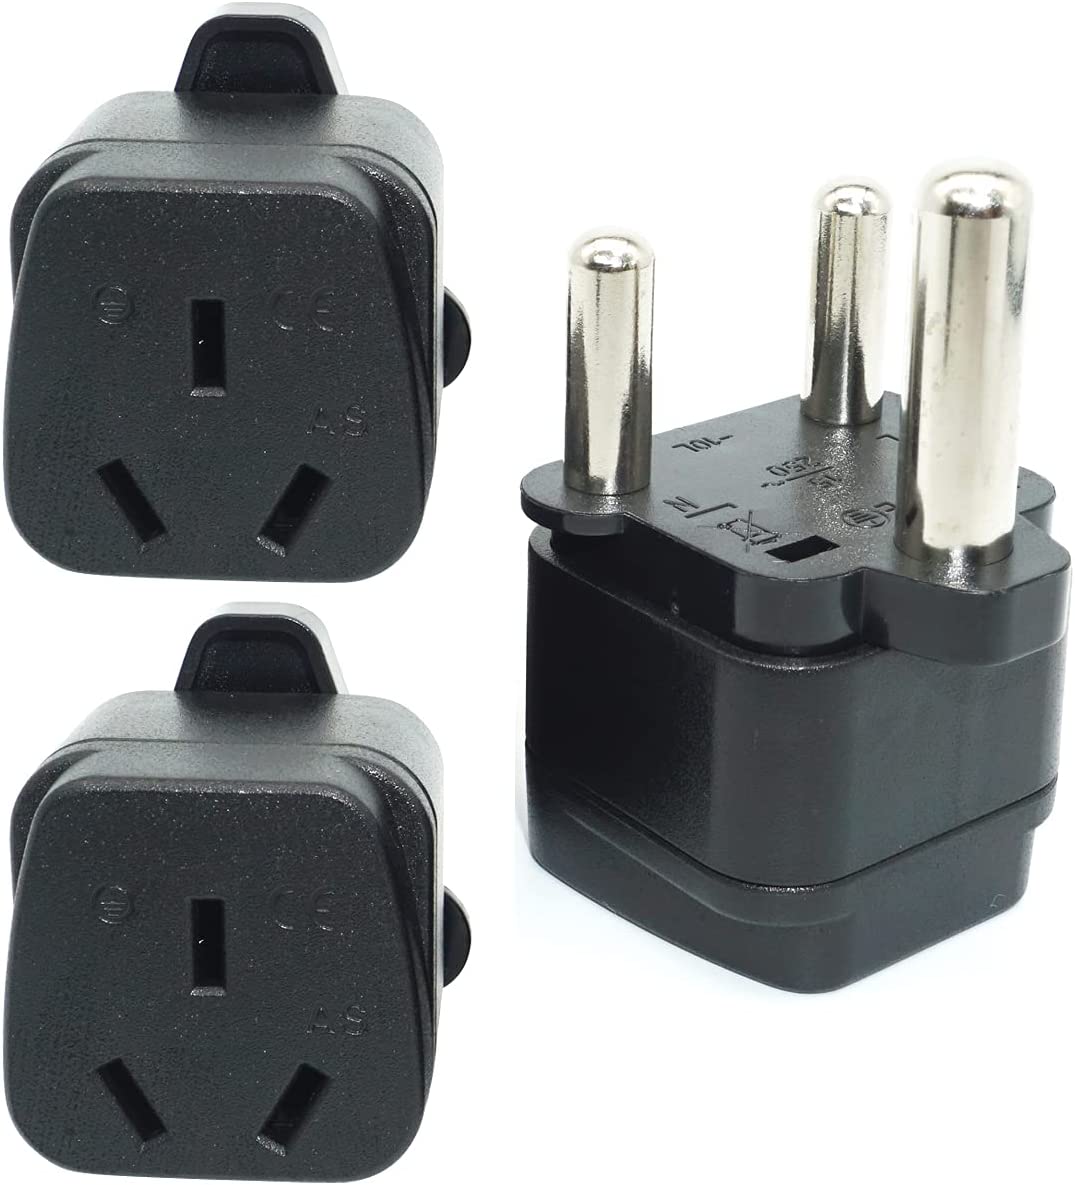 Travel Adapter for Australia/New Zealand with Safety Shutter and Insulated Pins - Smart Tech Shopping